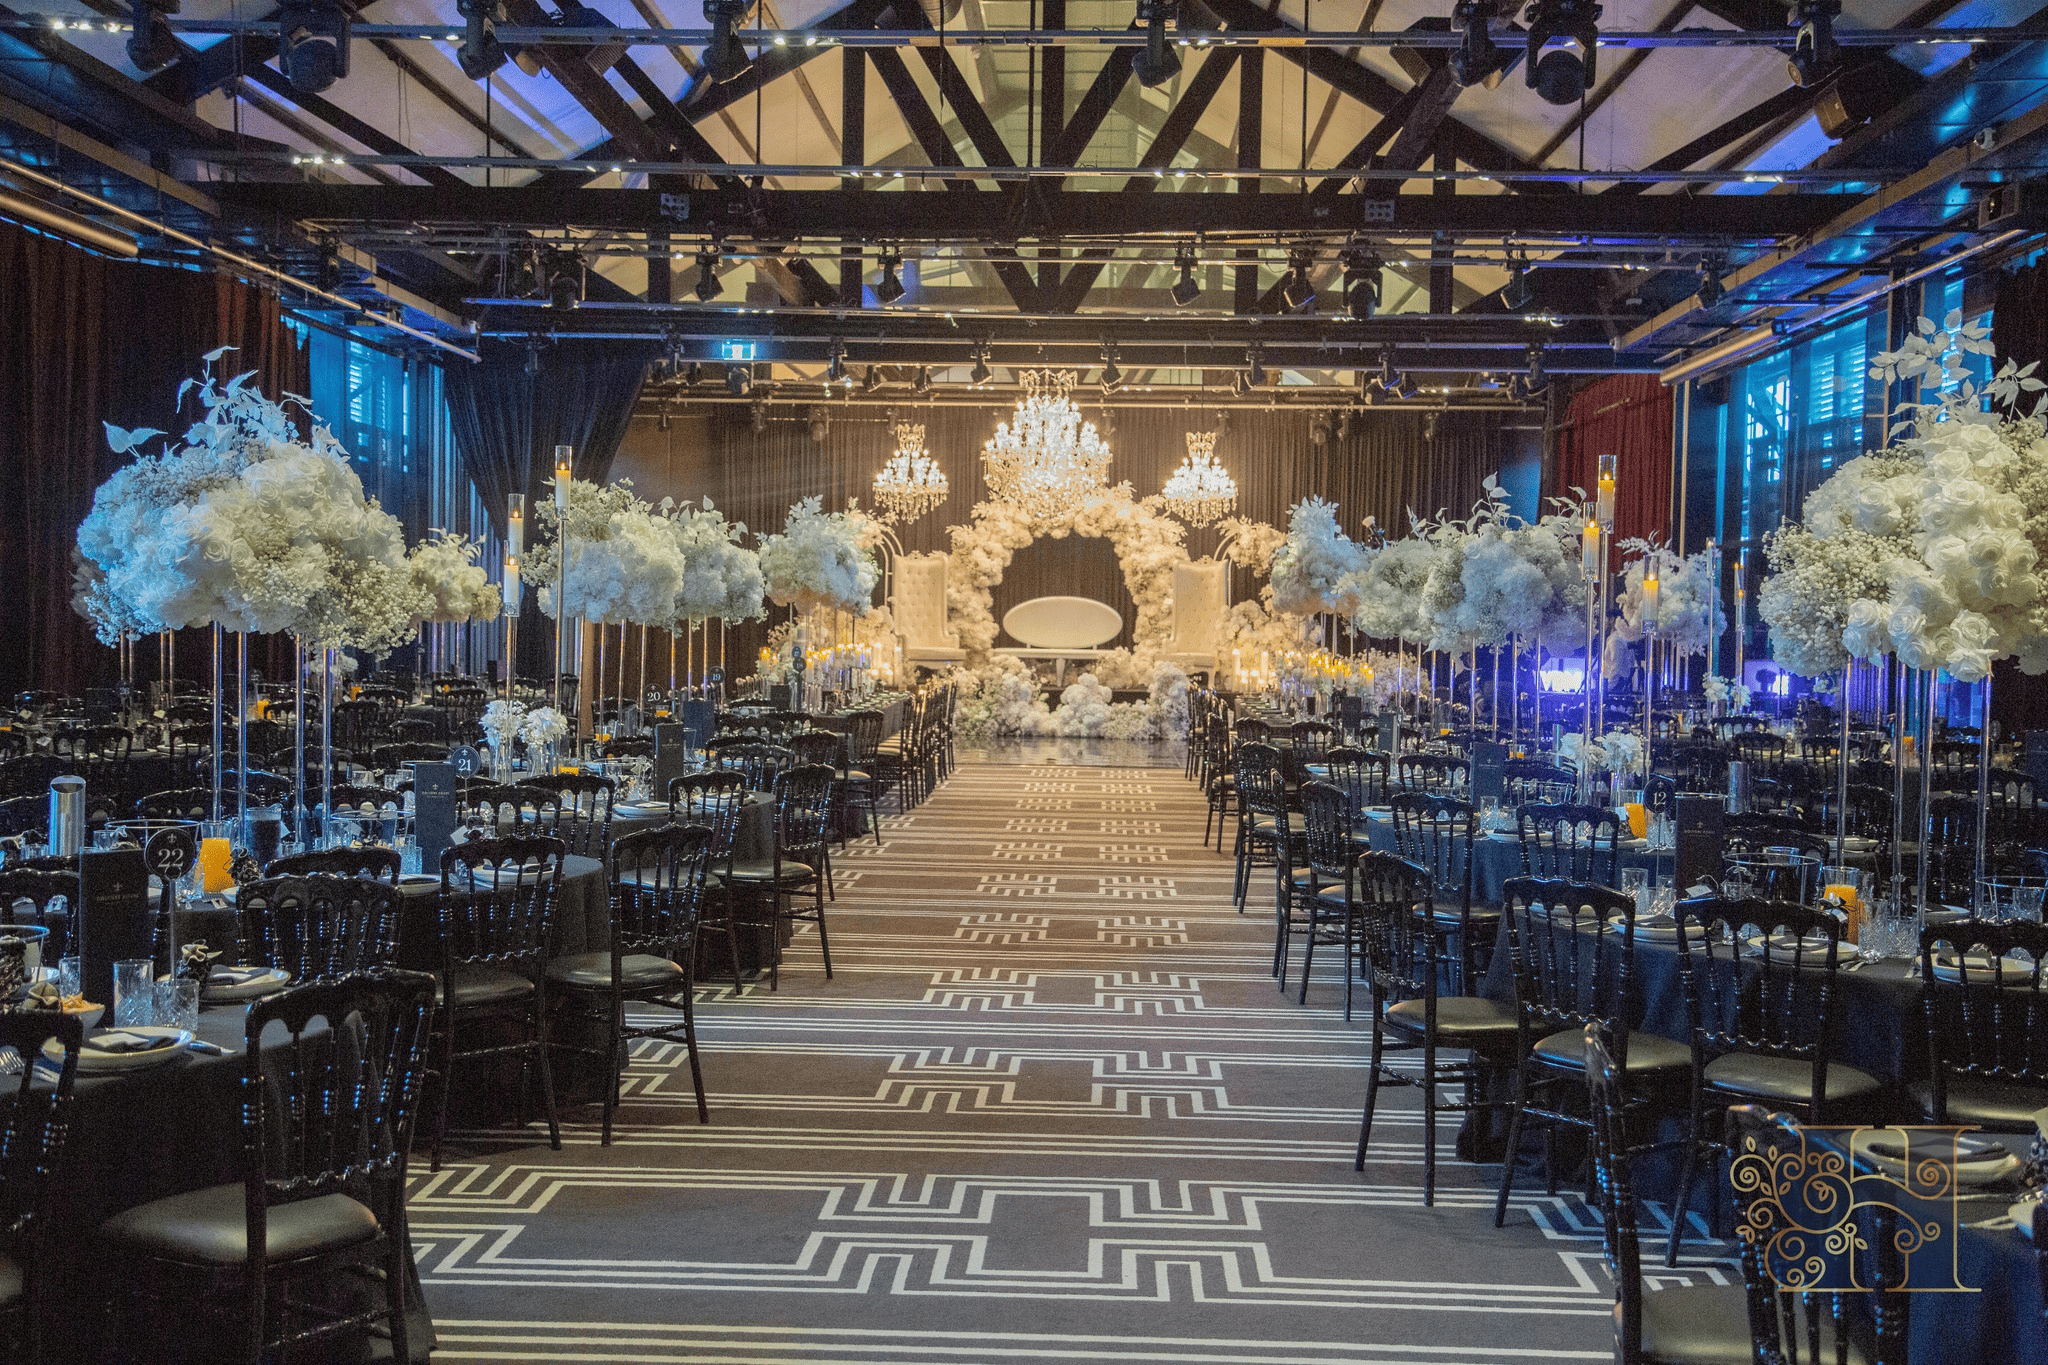 Elegant Indian wedding setup with large white floral centrepieces, a patterned aisle, and ambient blue lighting.